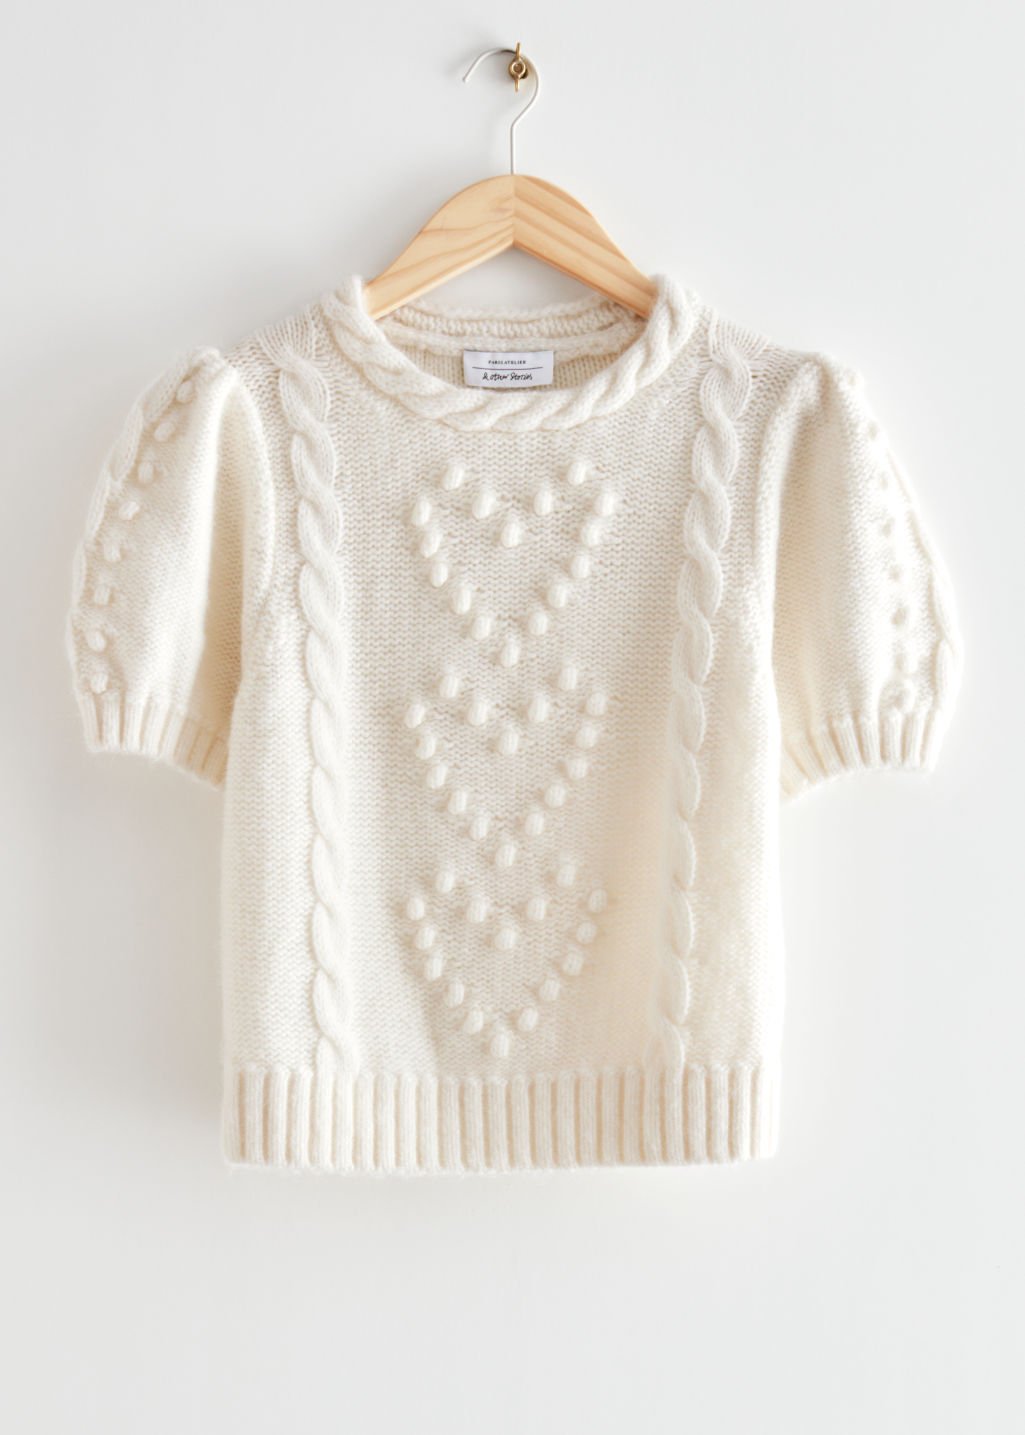 indhold ødemark eksistens & Other Stories Merino Cable Knit Sweater — UFO No More